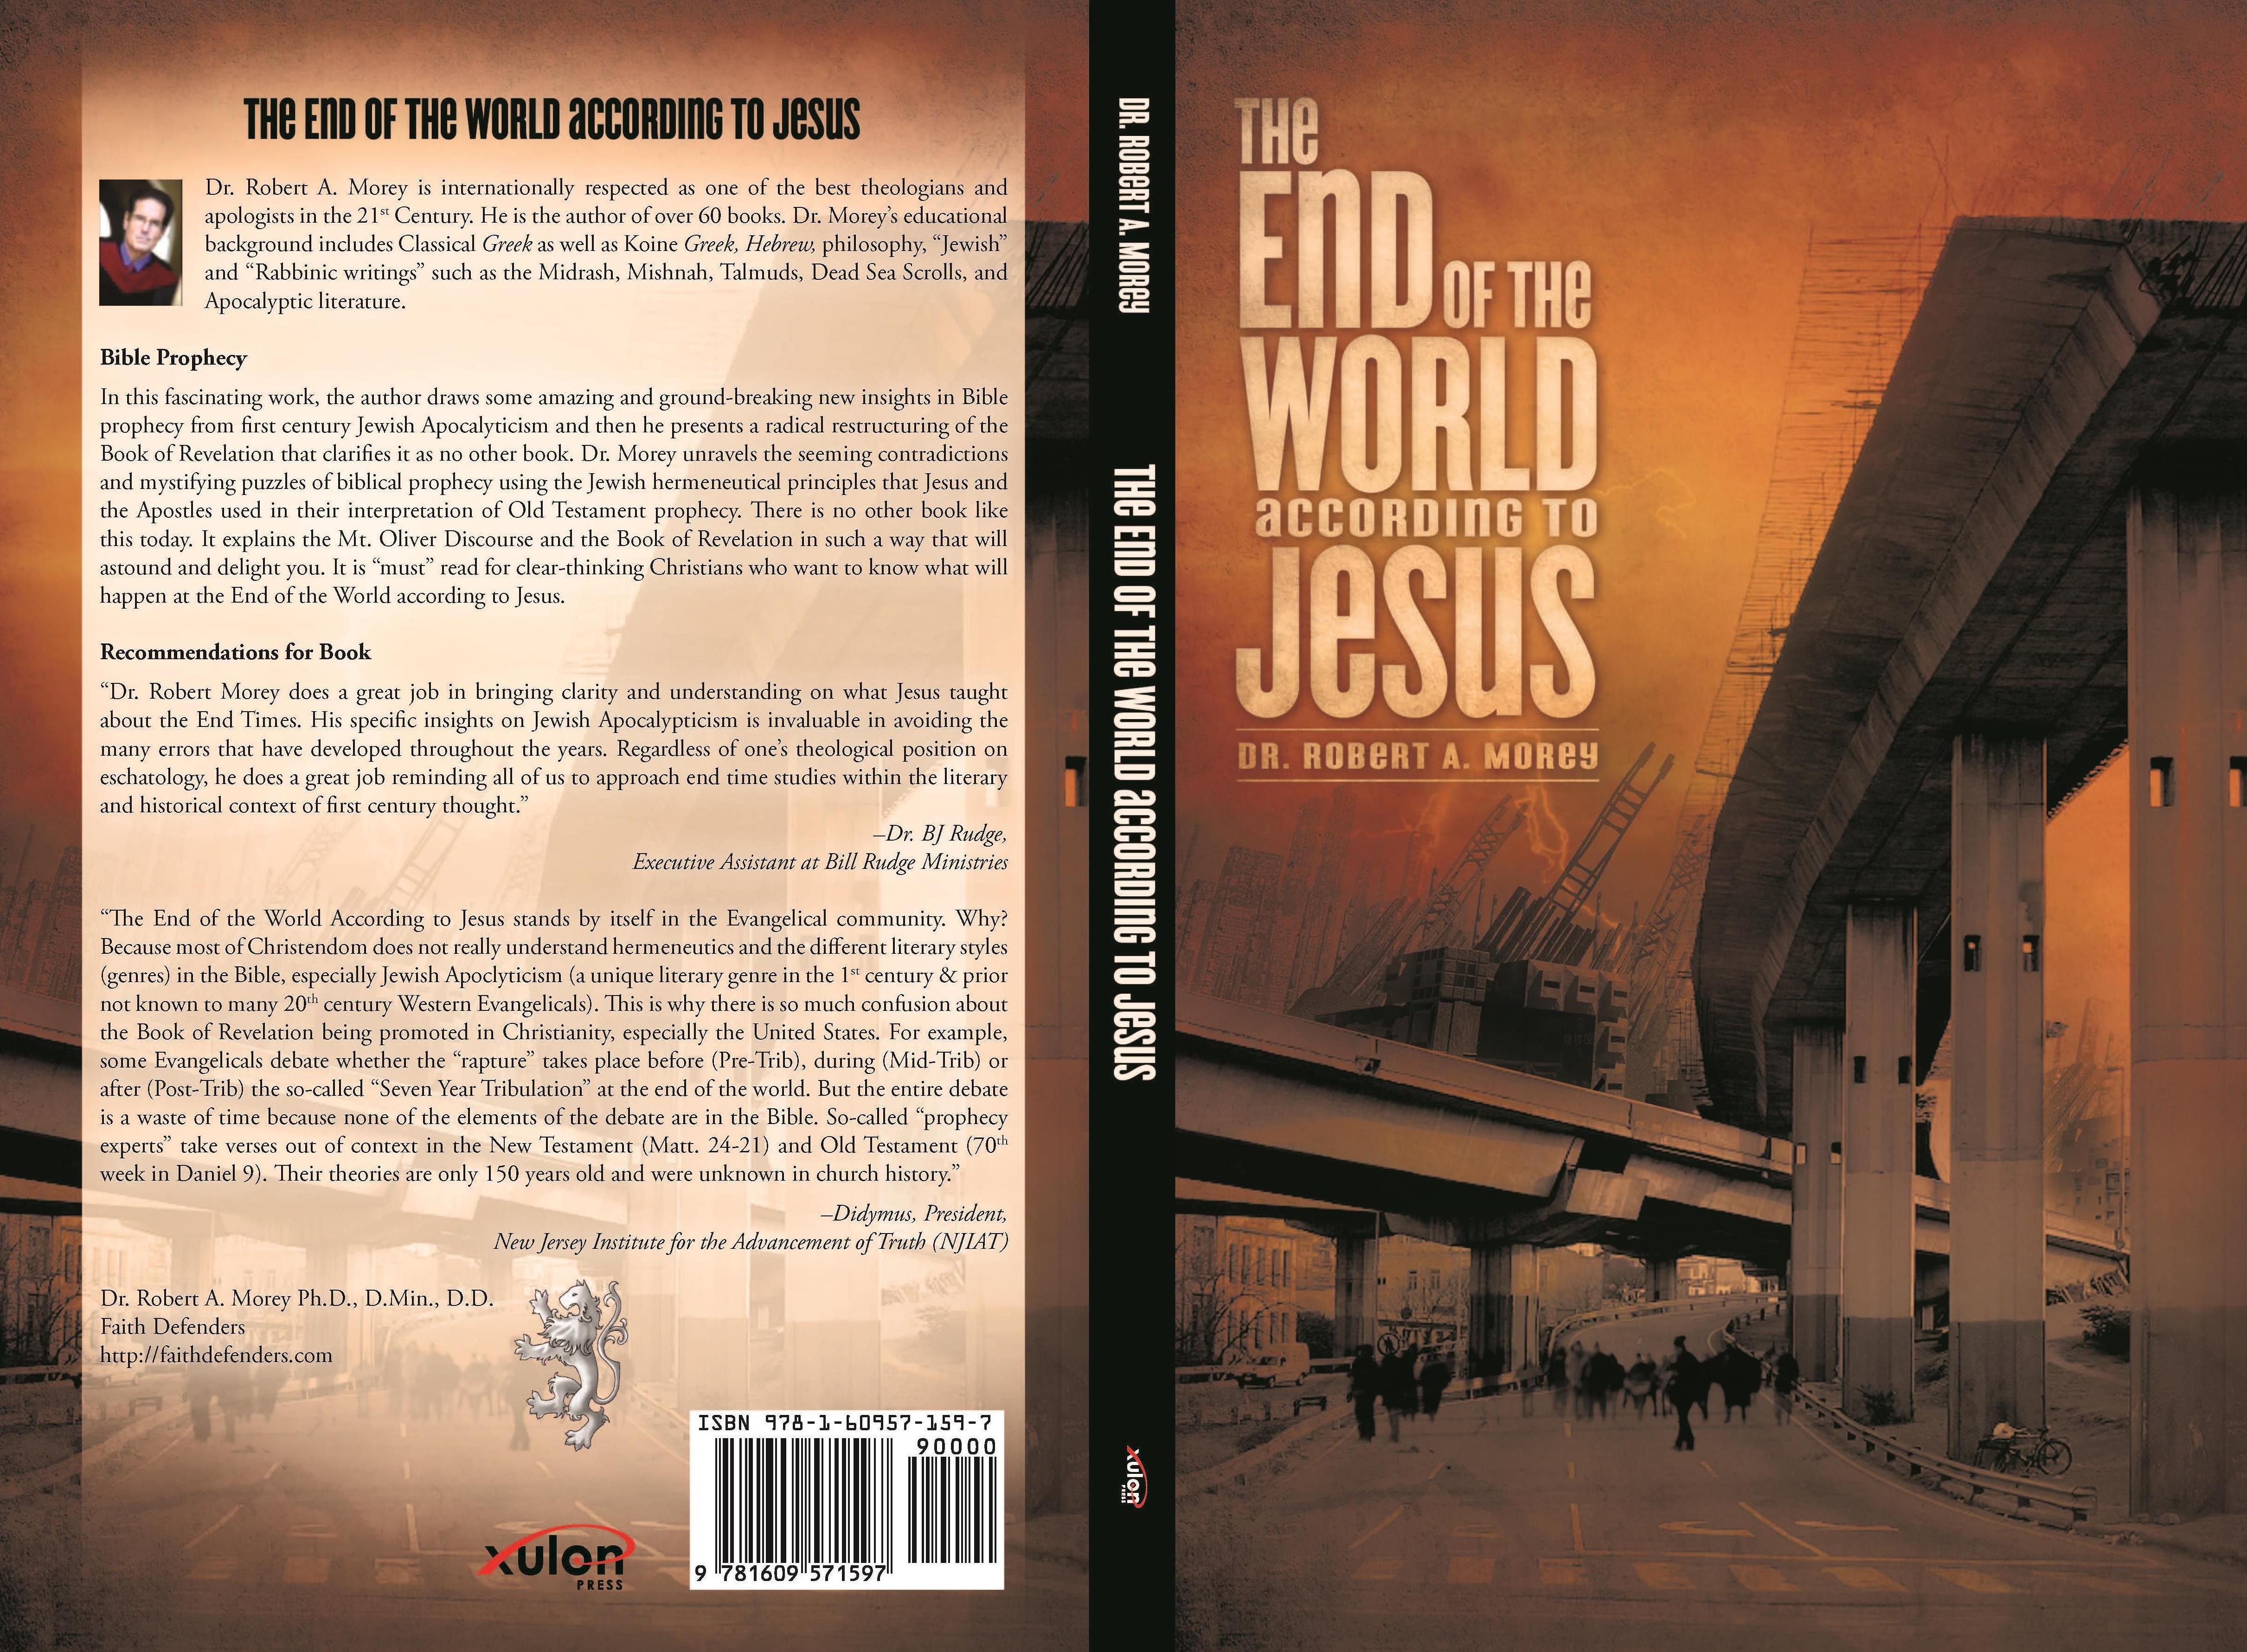 The End of the World According to Jesus by Dr. Robert A Morey